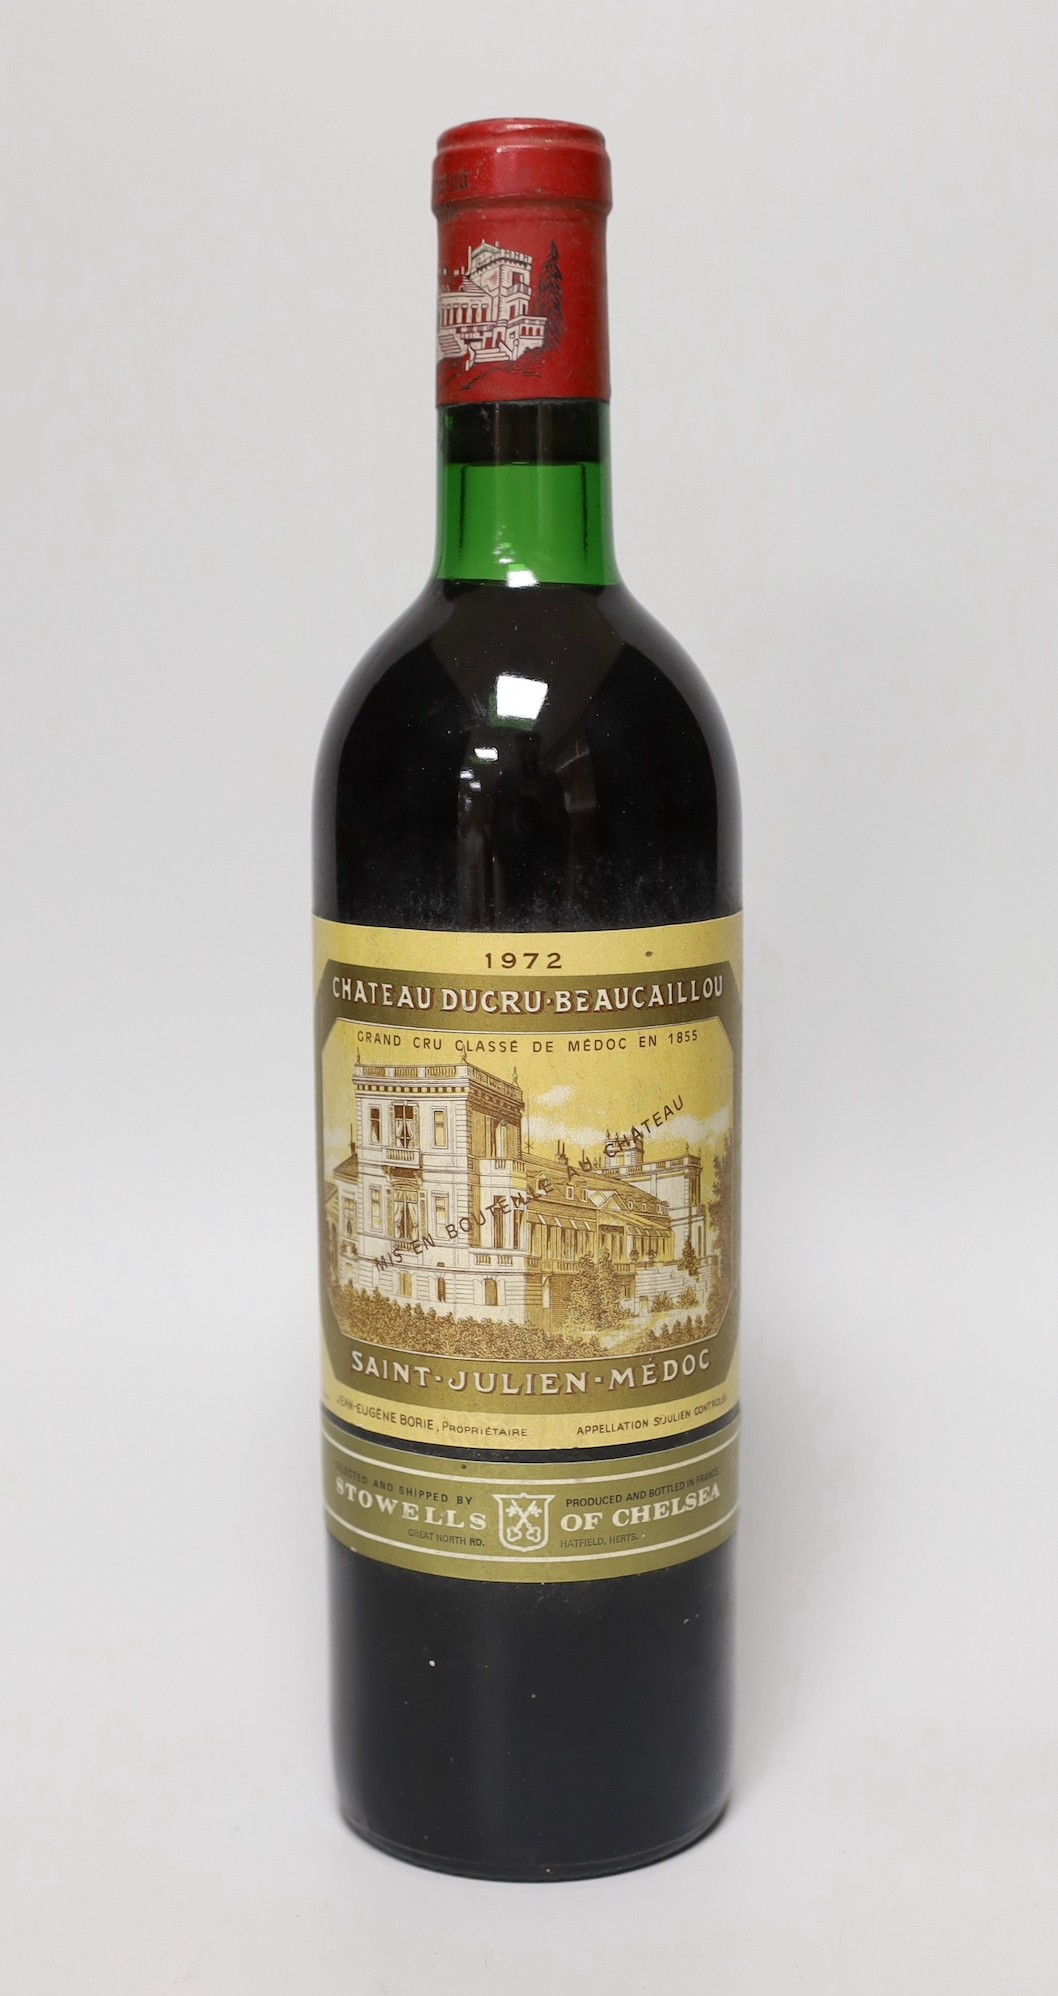 A bottle of Chateau Ducru Beaucaillou 1970